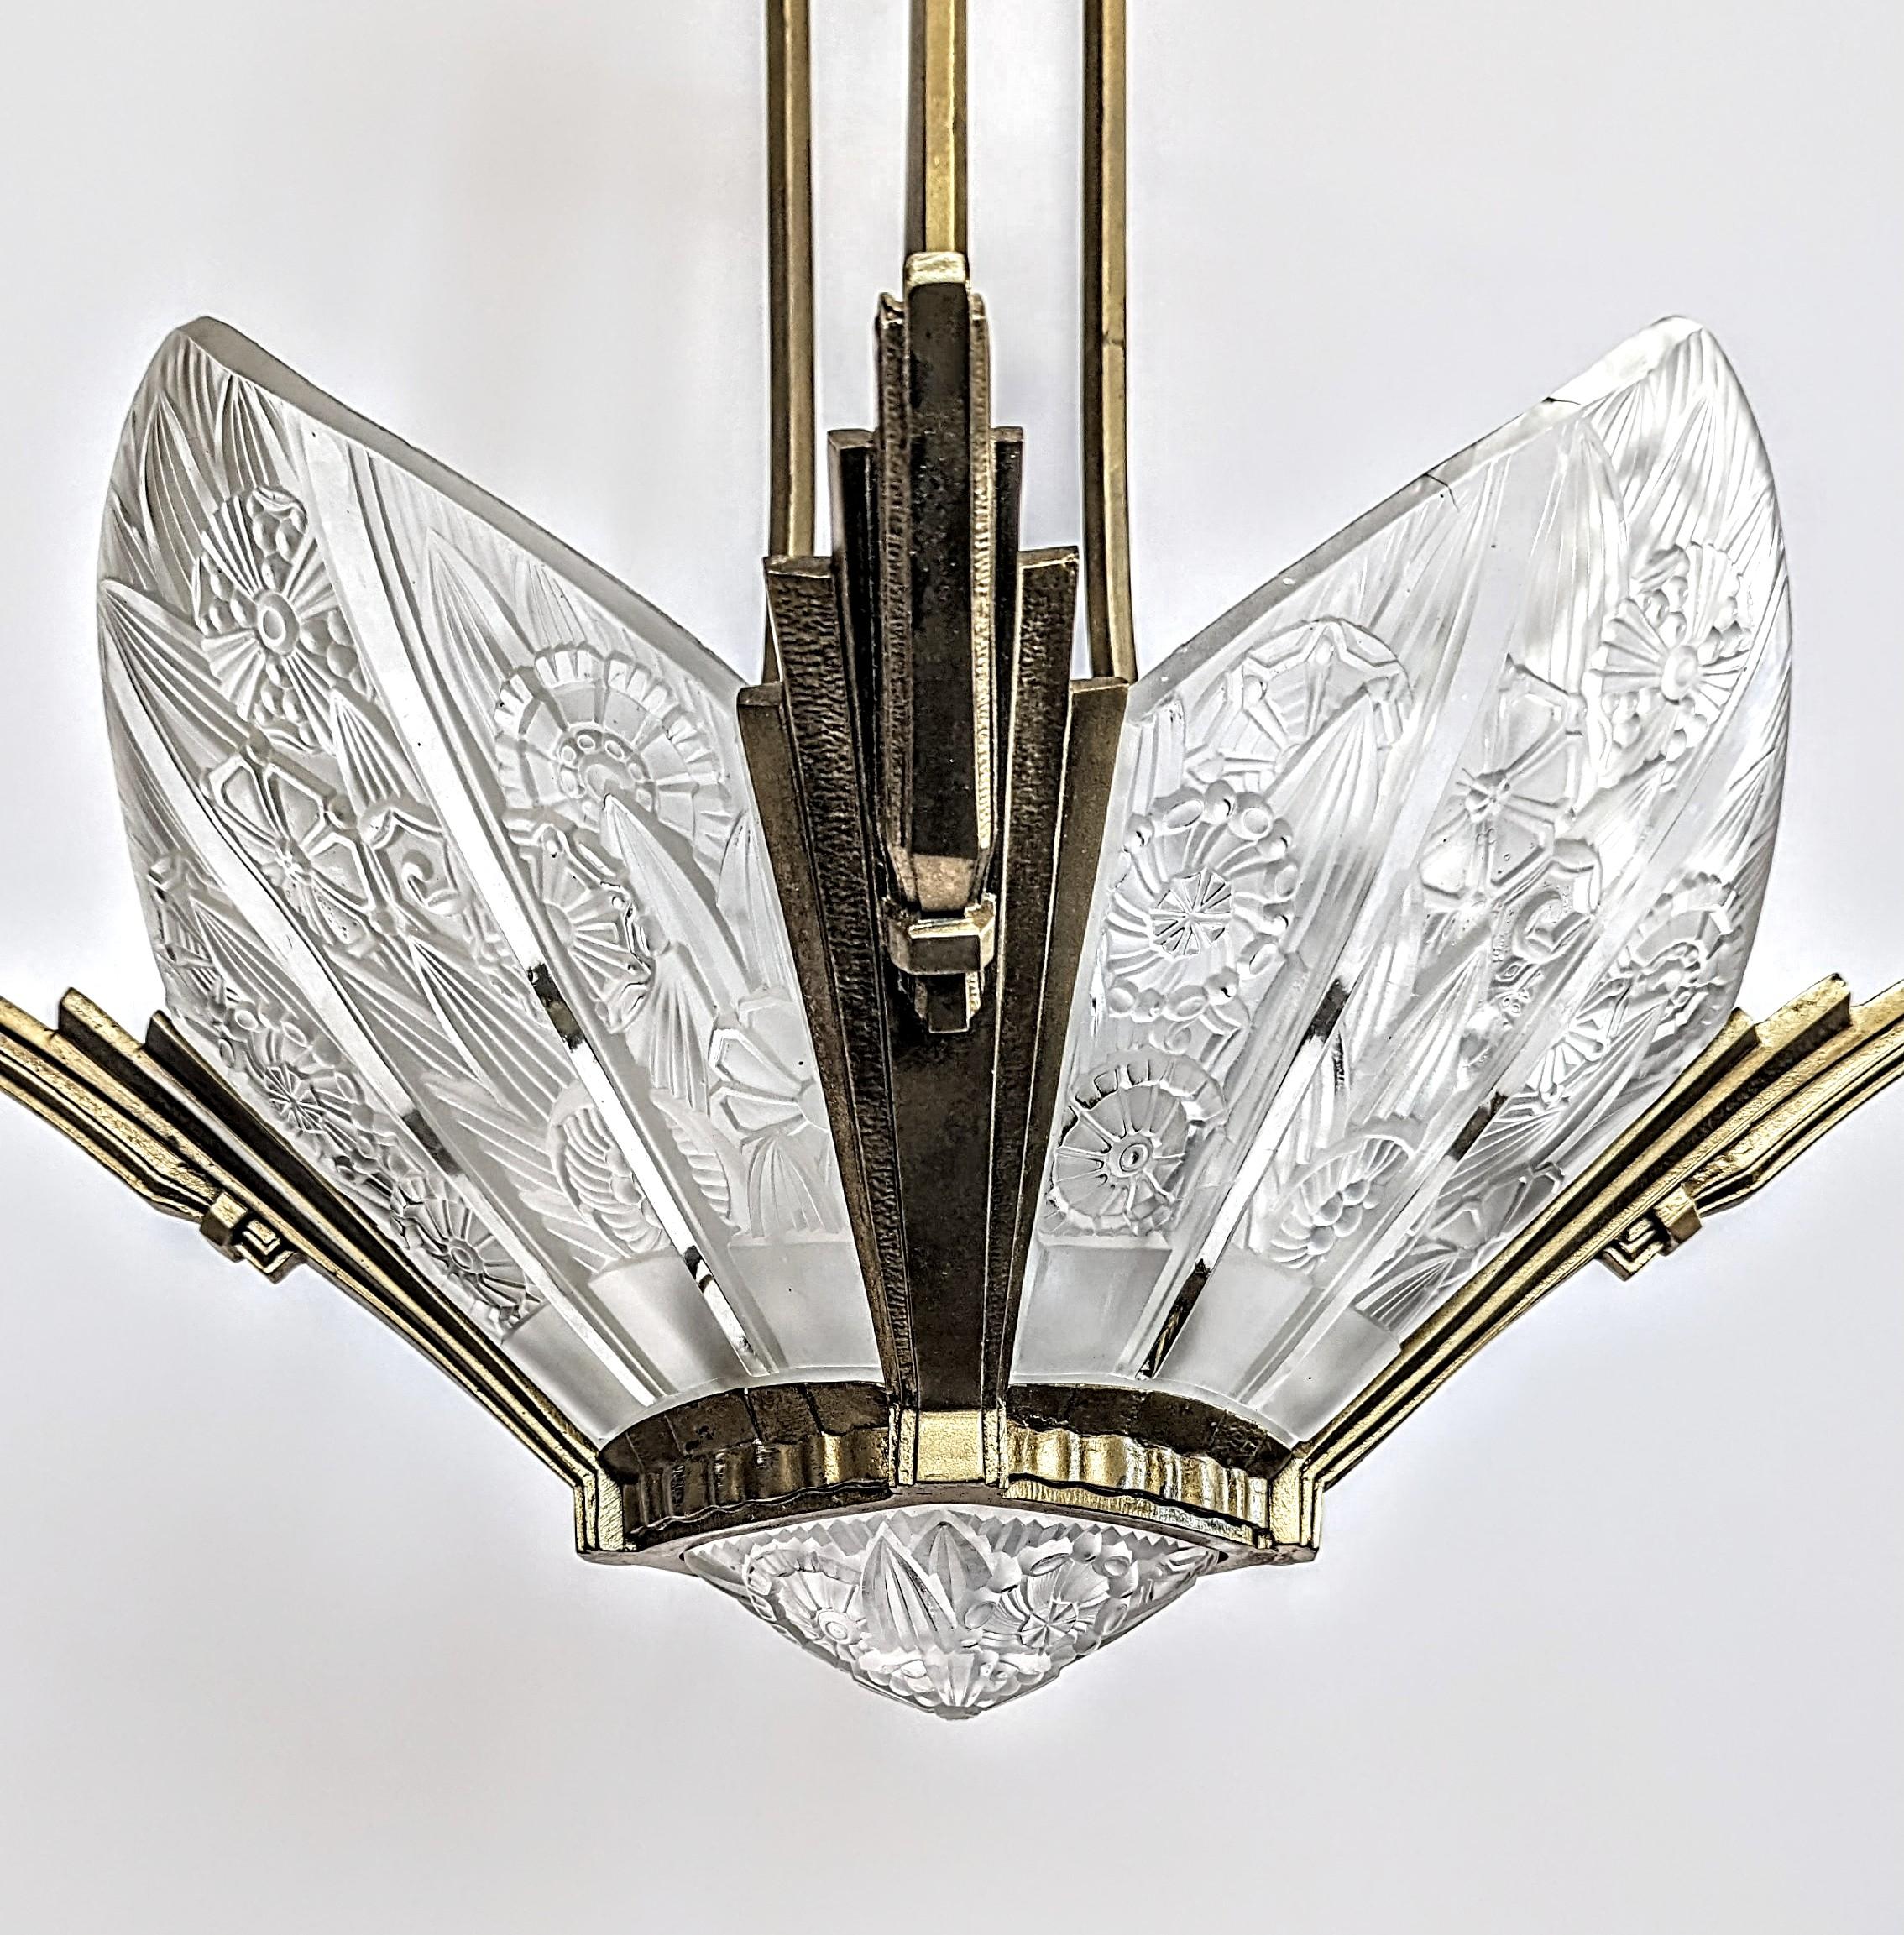 20th Century French Art Deco Chandelier Signed by Hettier Vincent For Sale